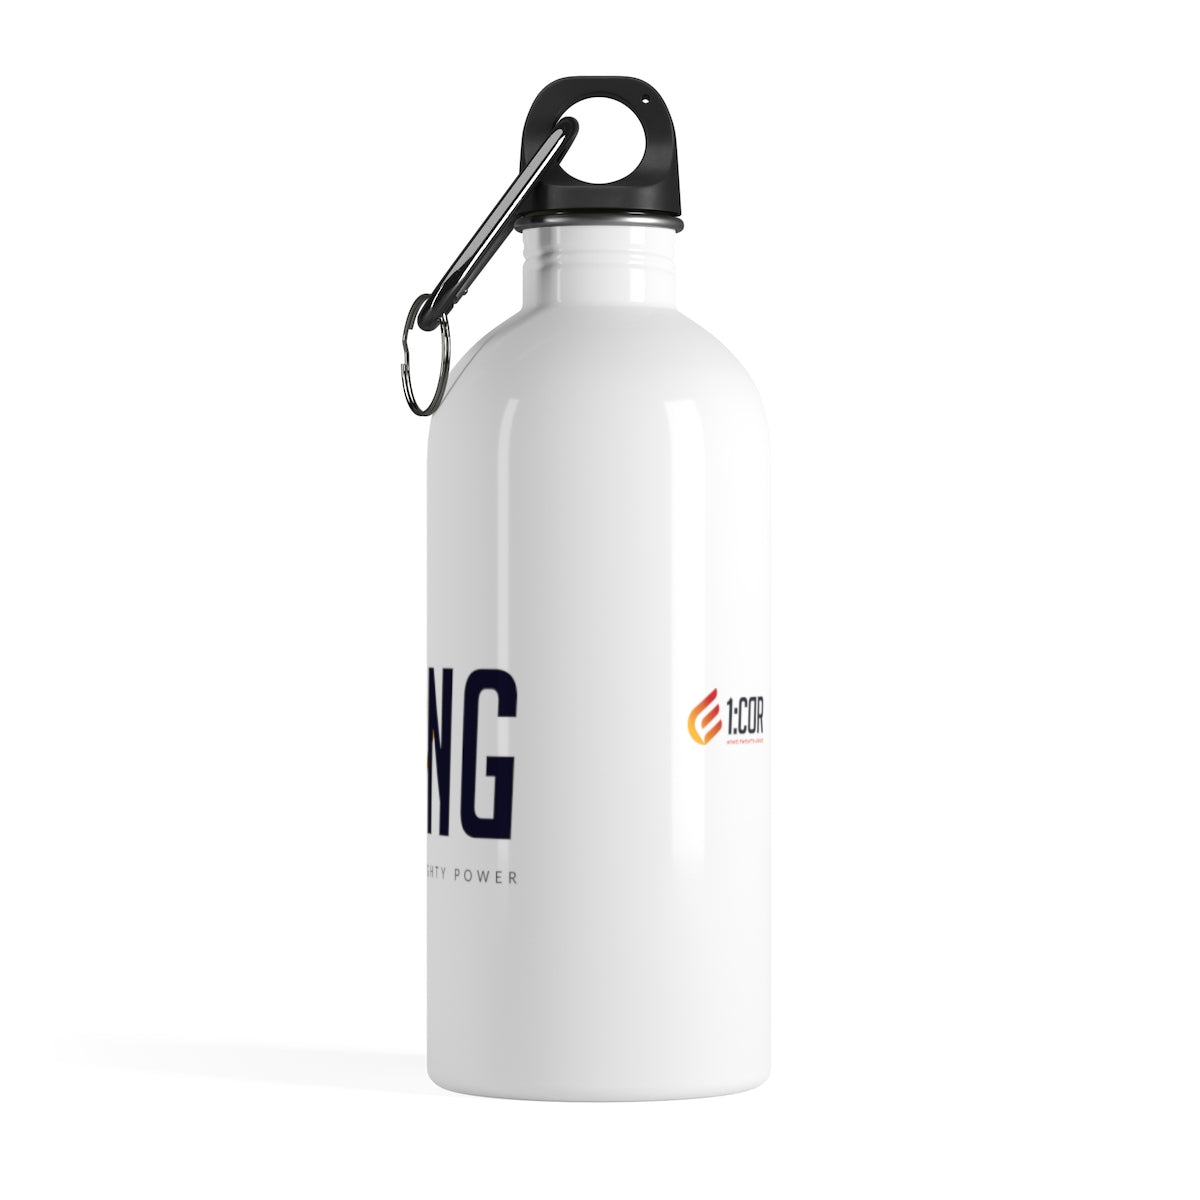 Be Strong | Stainless Steel Water Bottle